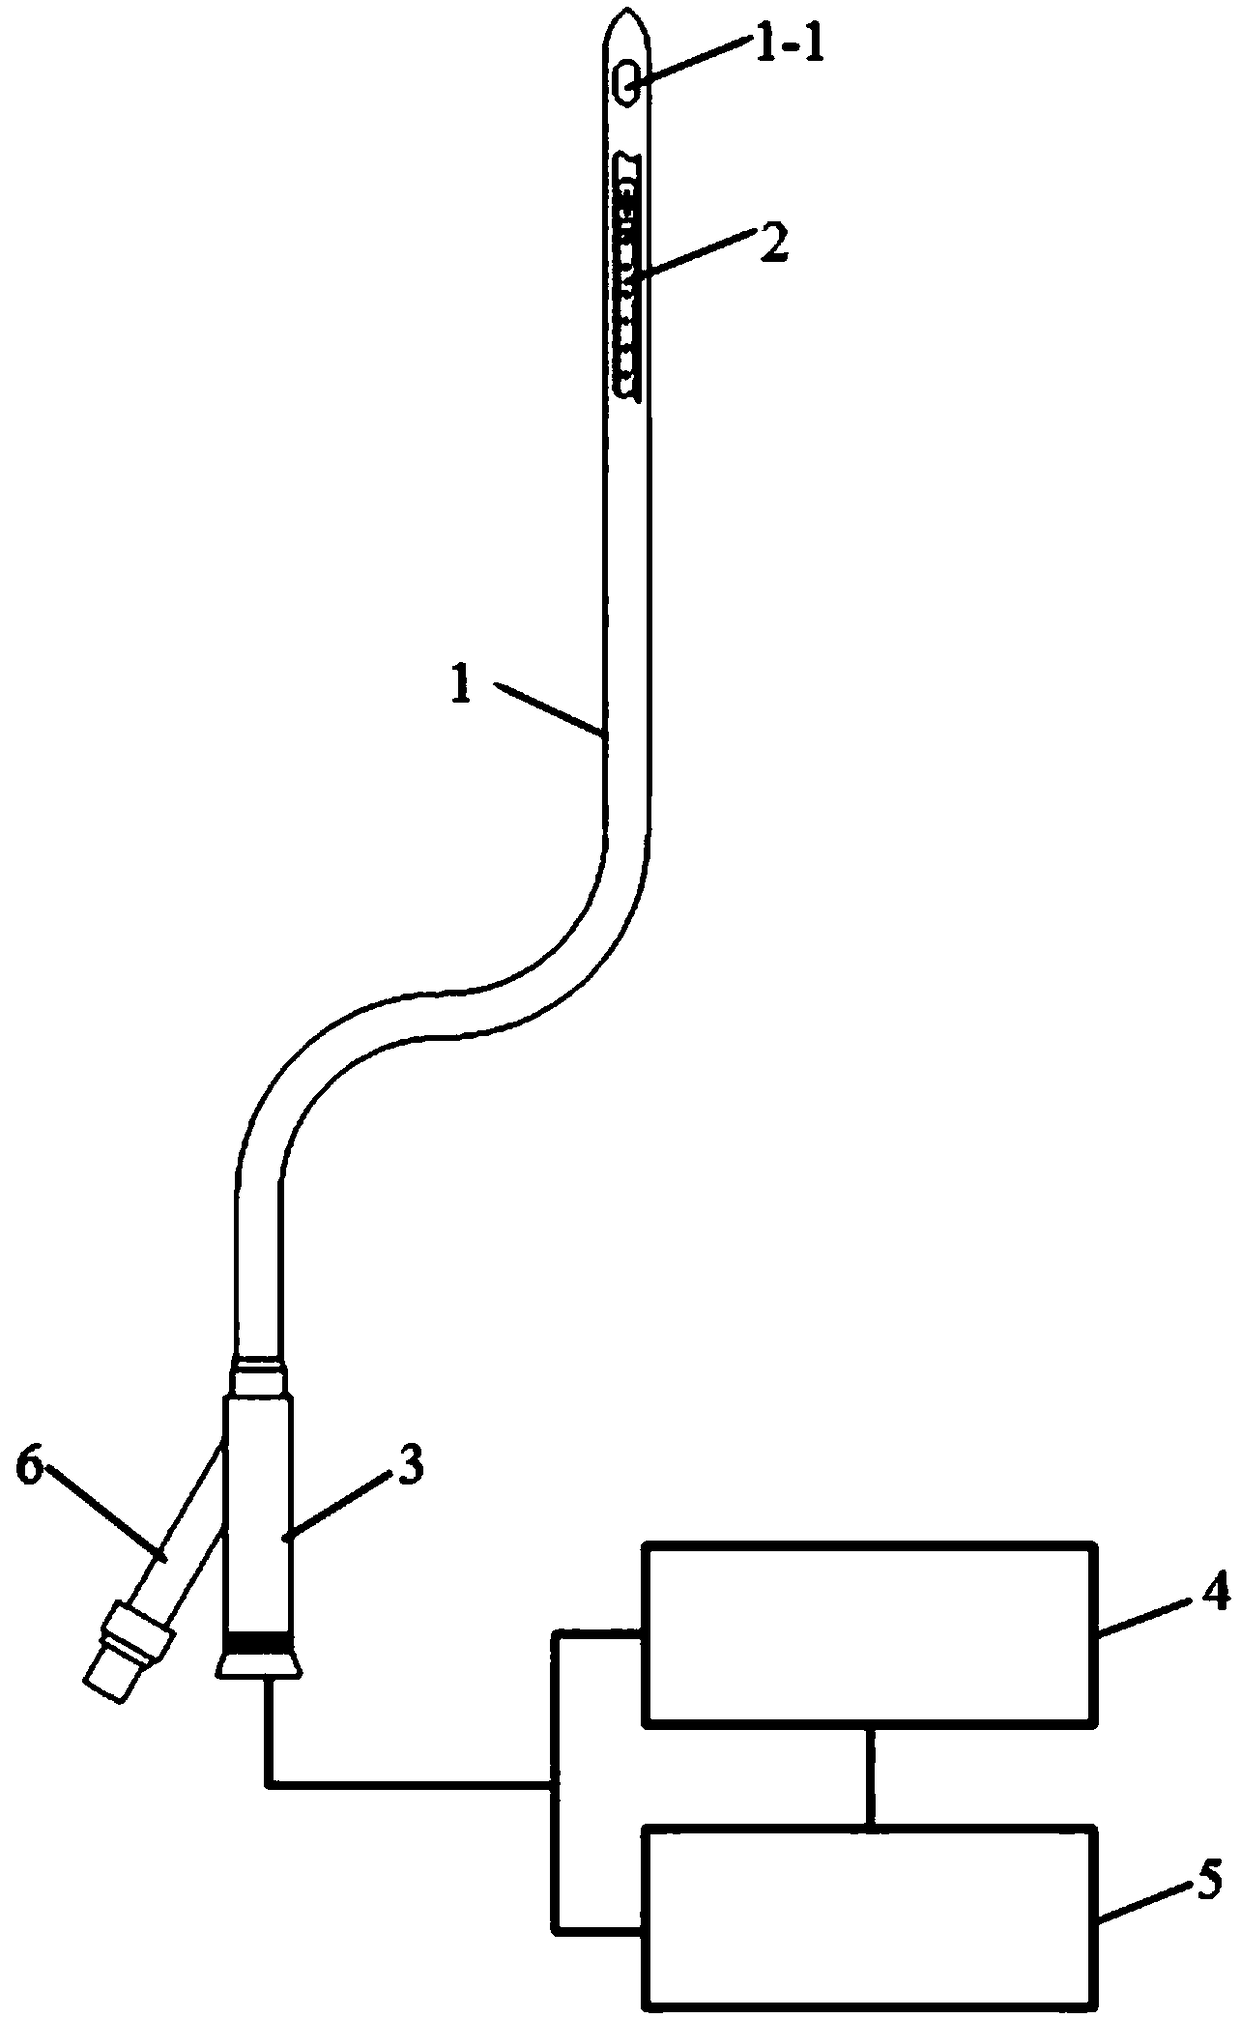 Urethral catheterization apparatus for preventing adhesion of bacteria